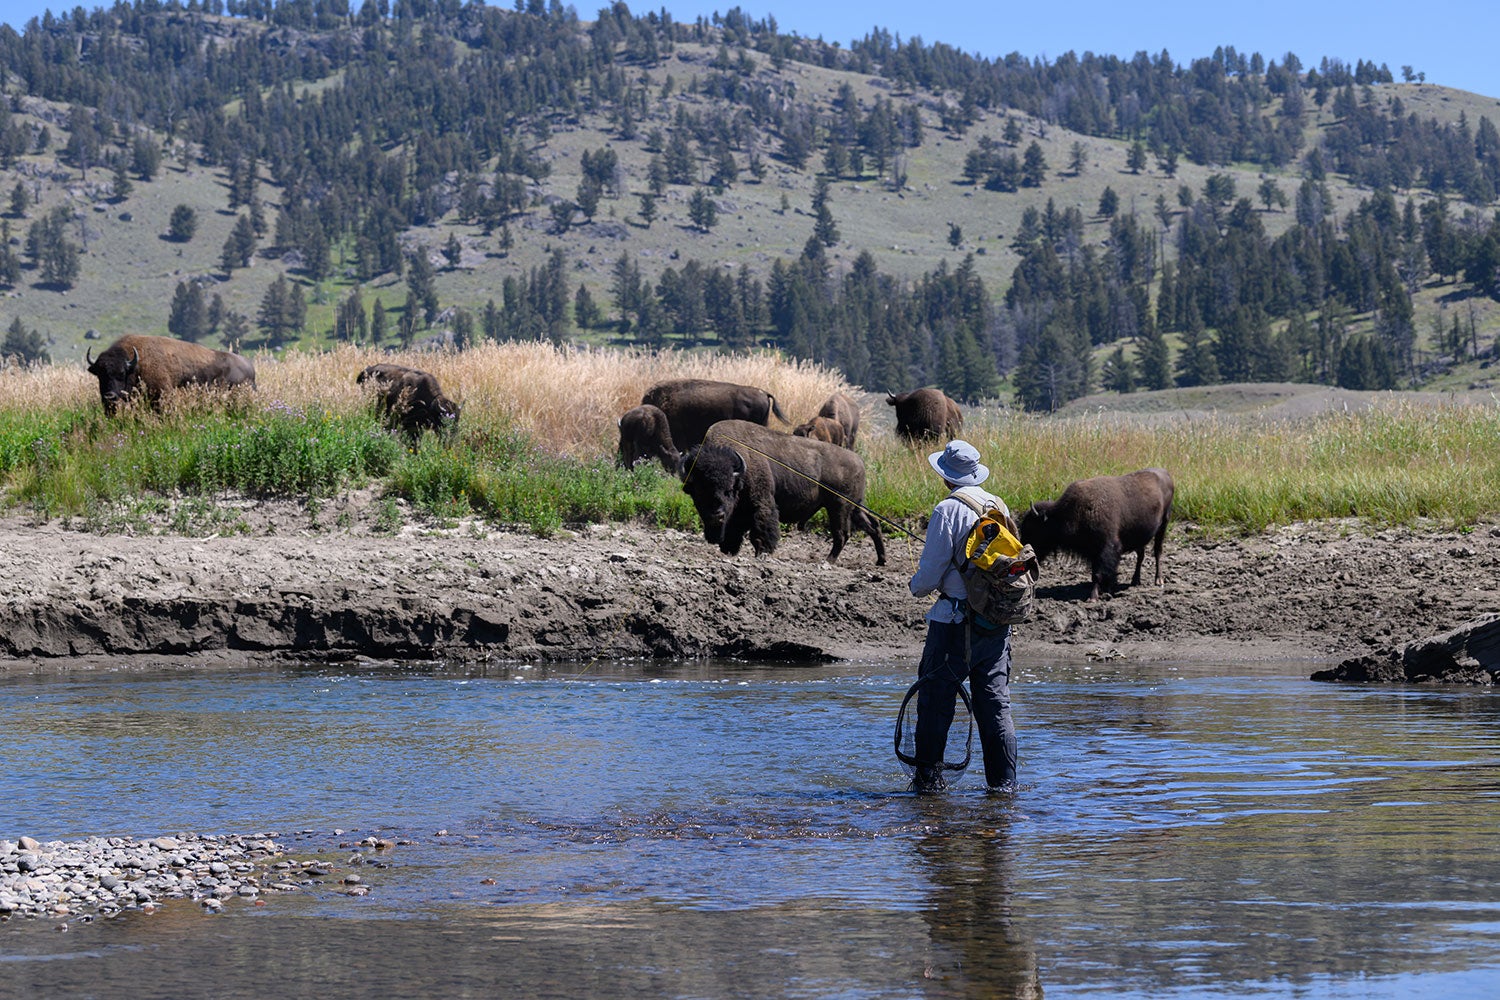 angler in river looks at group of bison on riverbank